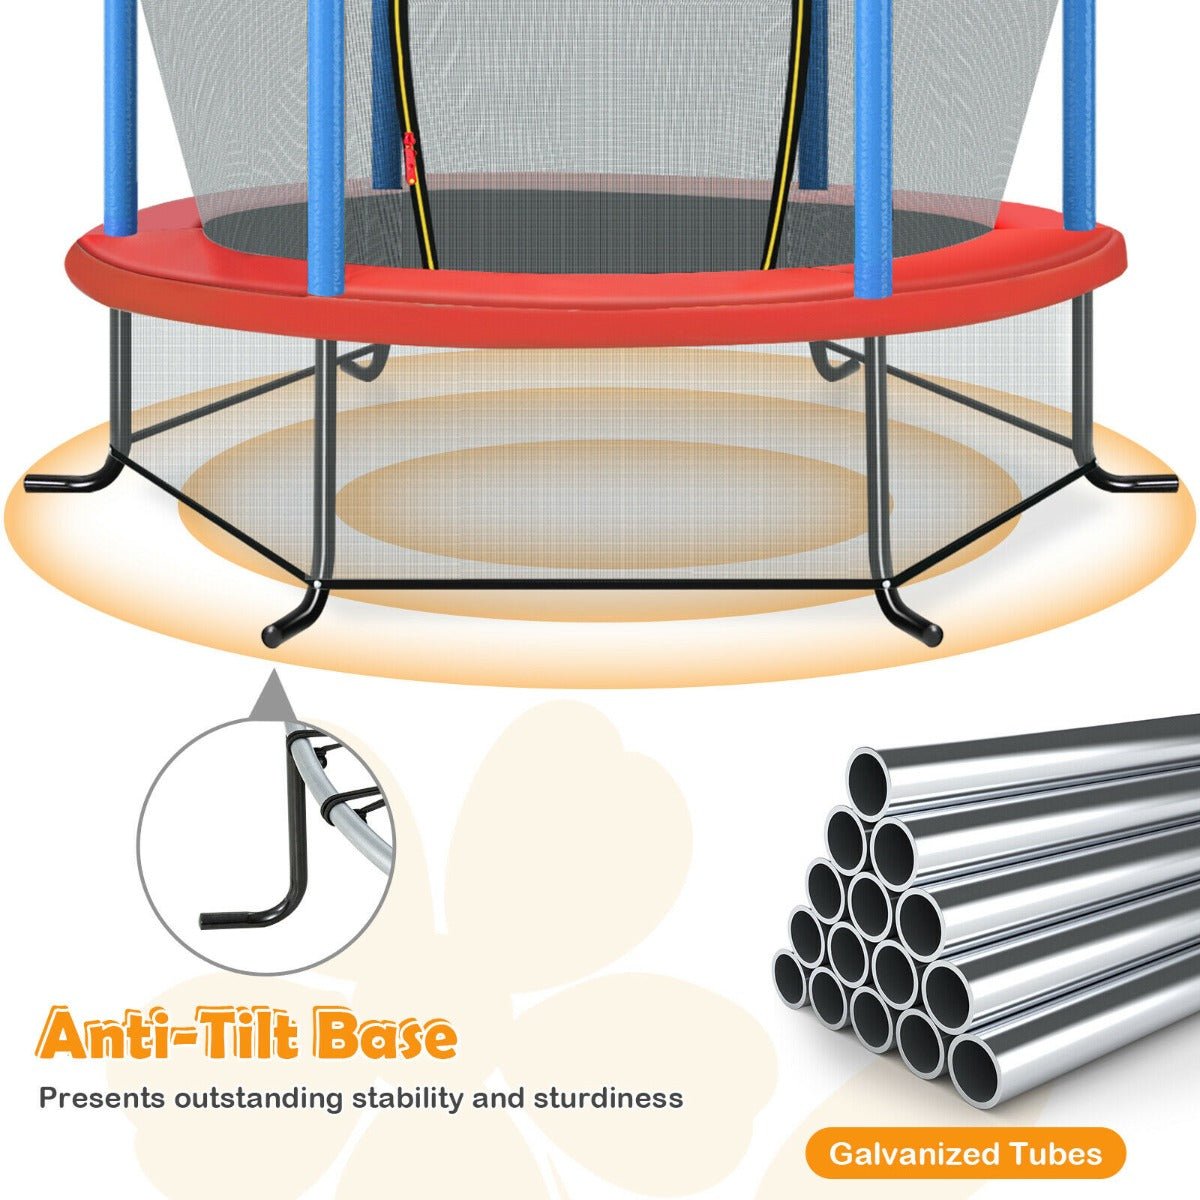 Jumping Joy: Blue Mini Trampoline with Enclosure Net for Play